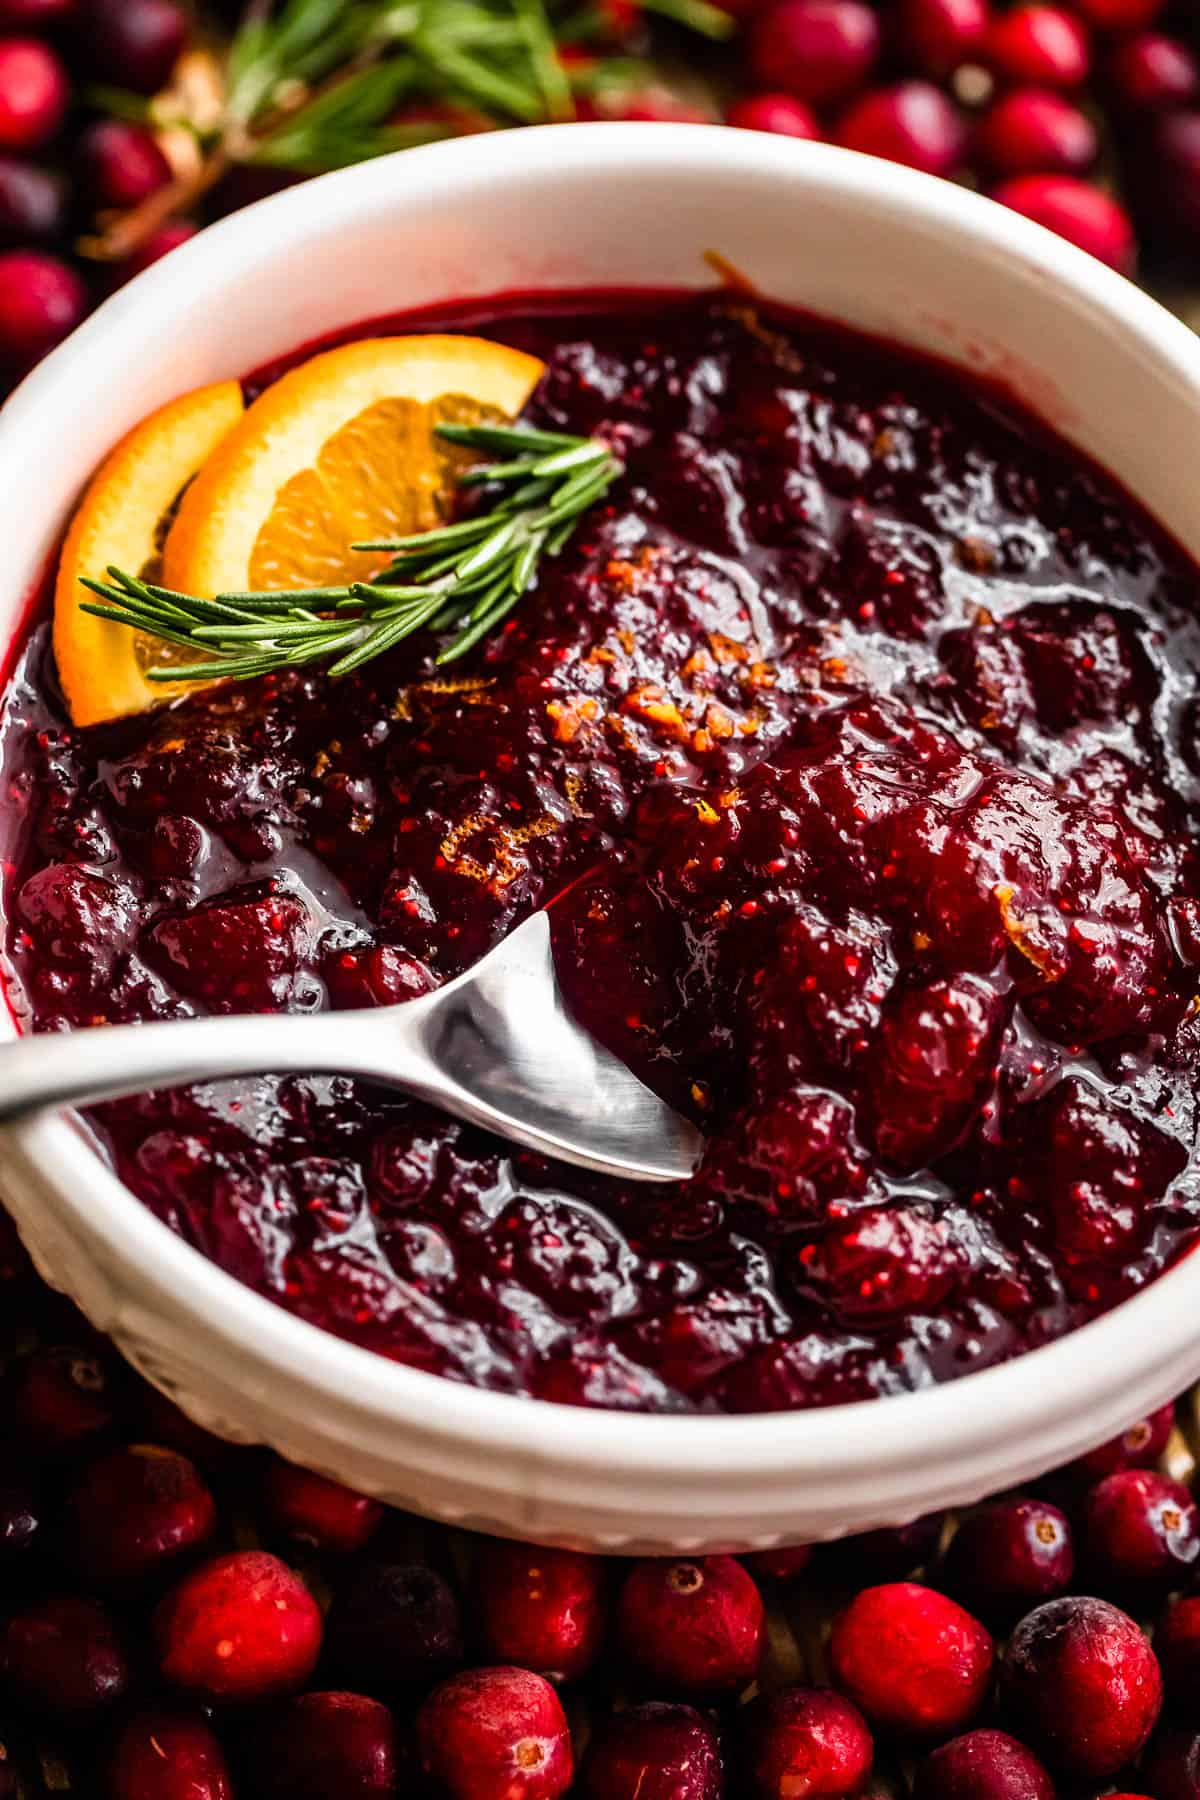 cranberry sauce inside of a white bowl surround by fresh cranberries and garnished with orange slices and rosemary sprig.